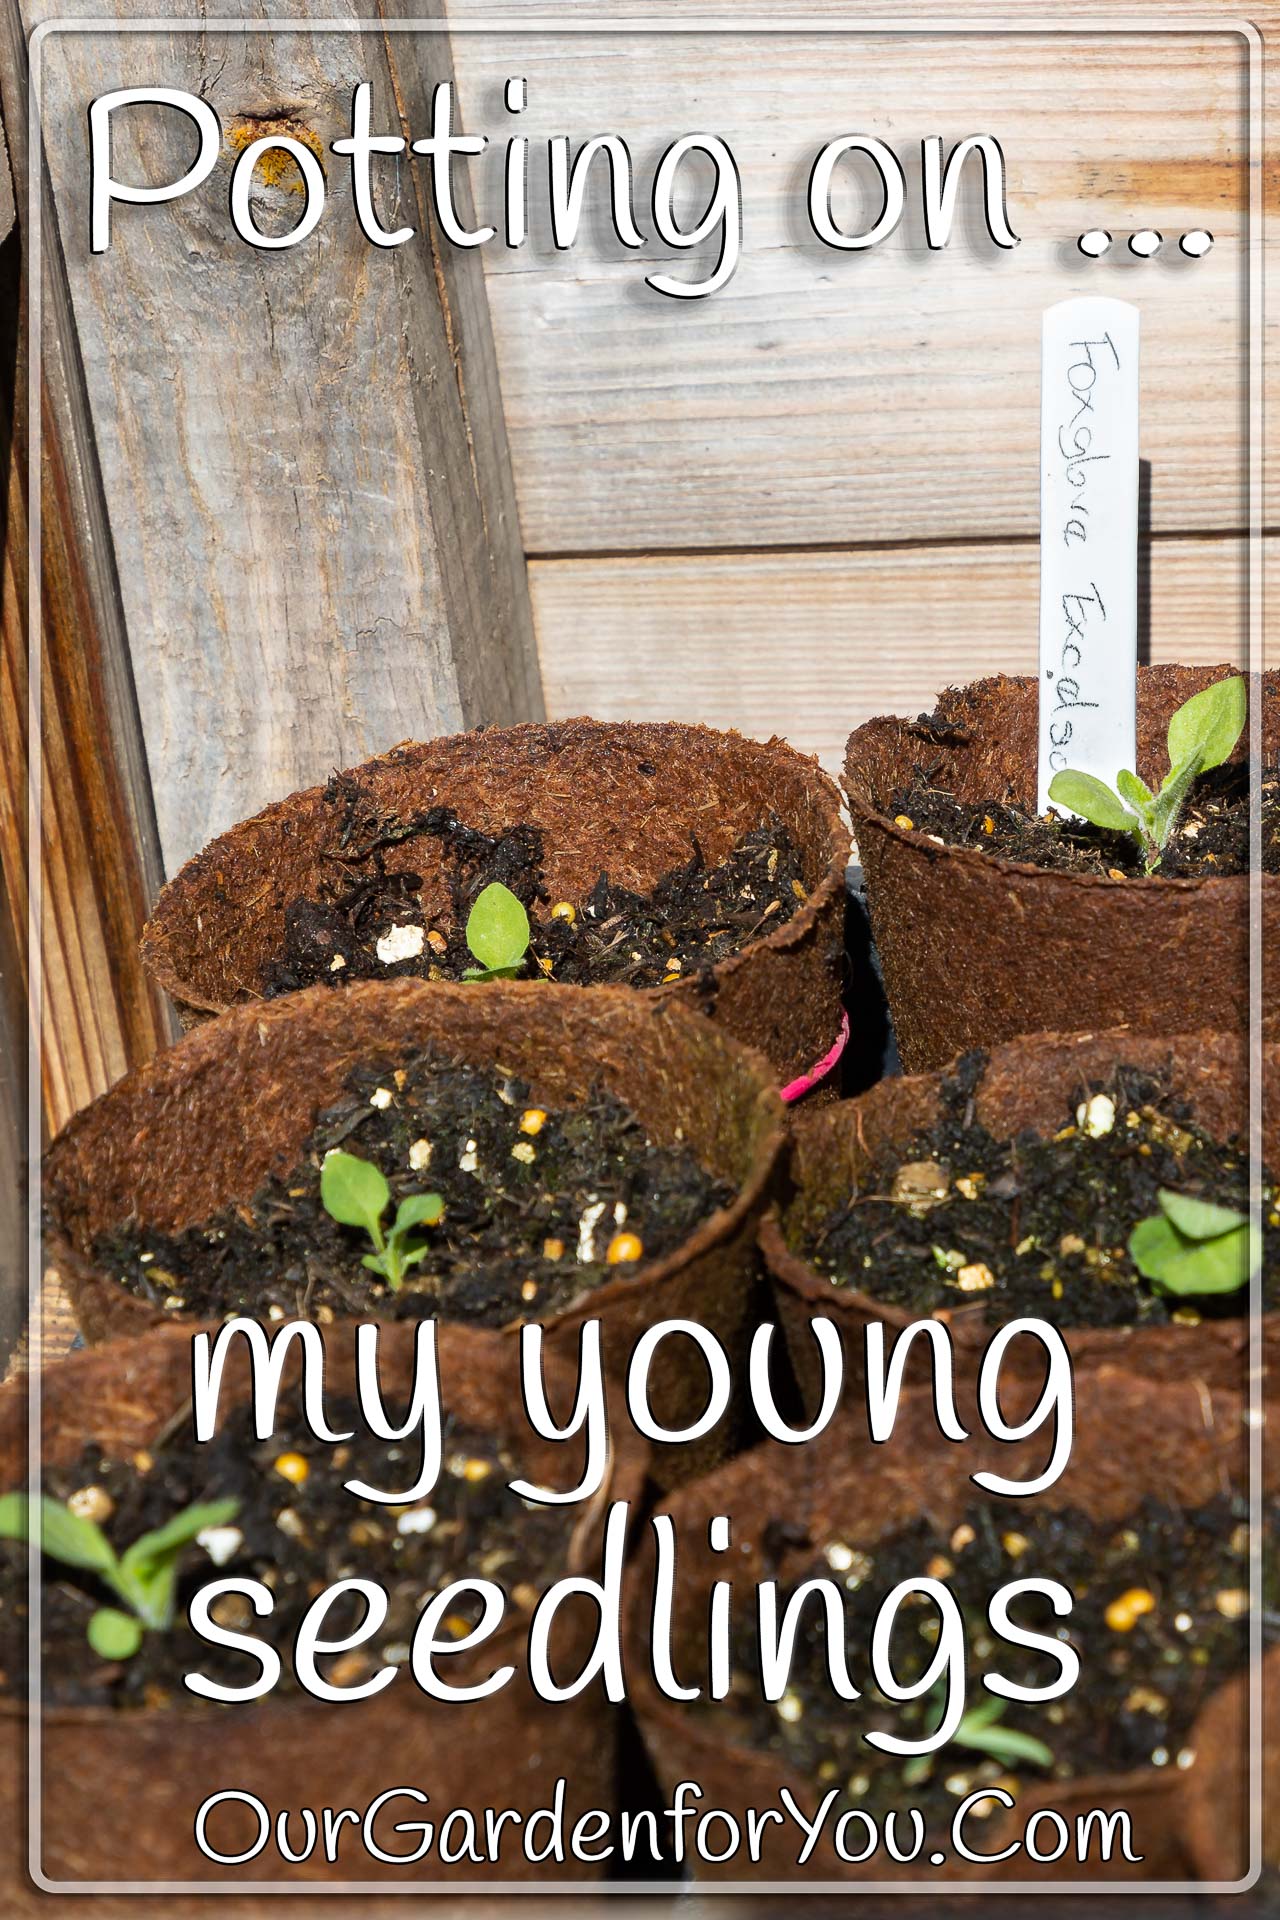 The pin image for our post - 'Potting on my young seedlings '